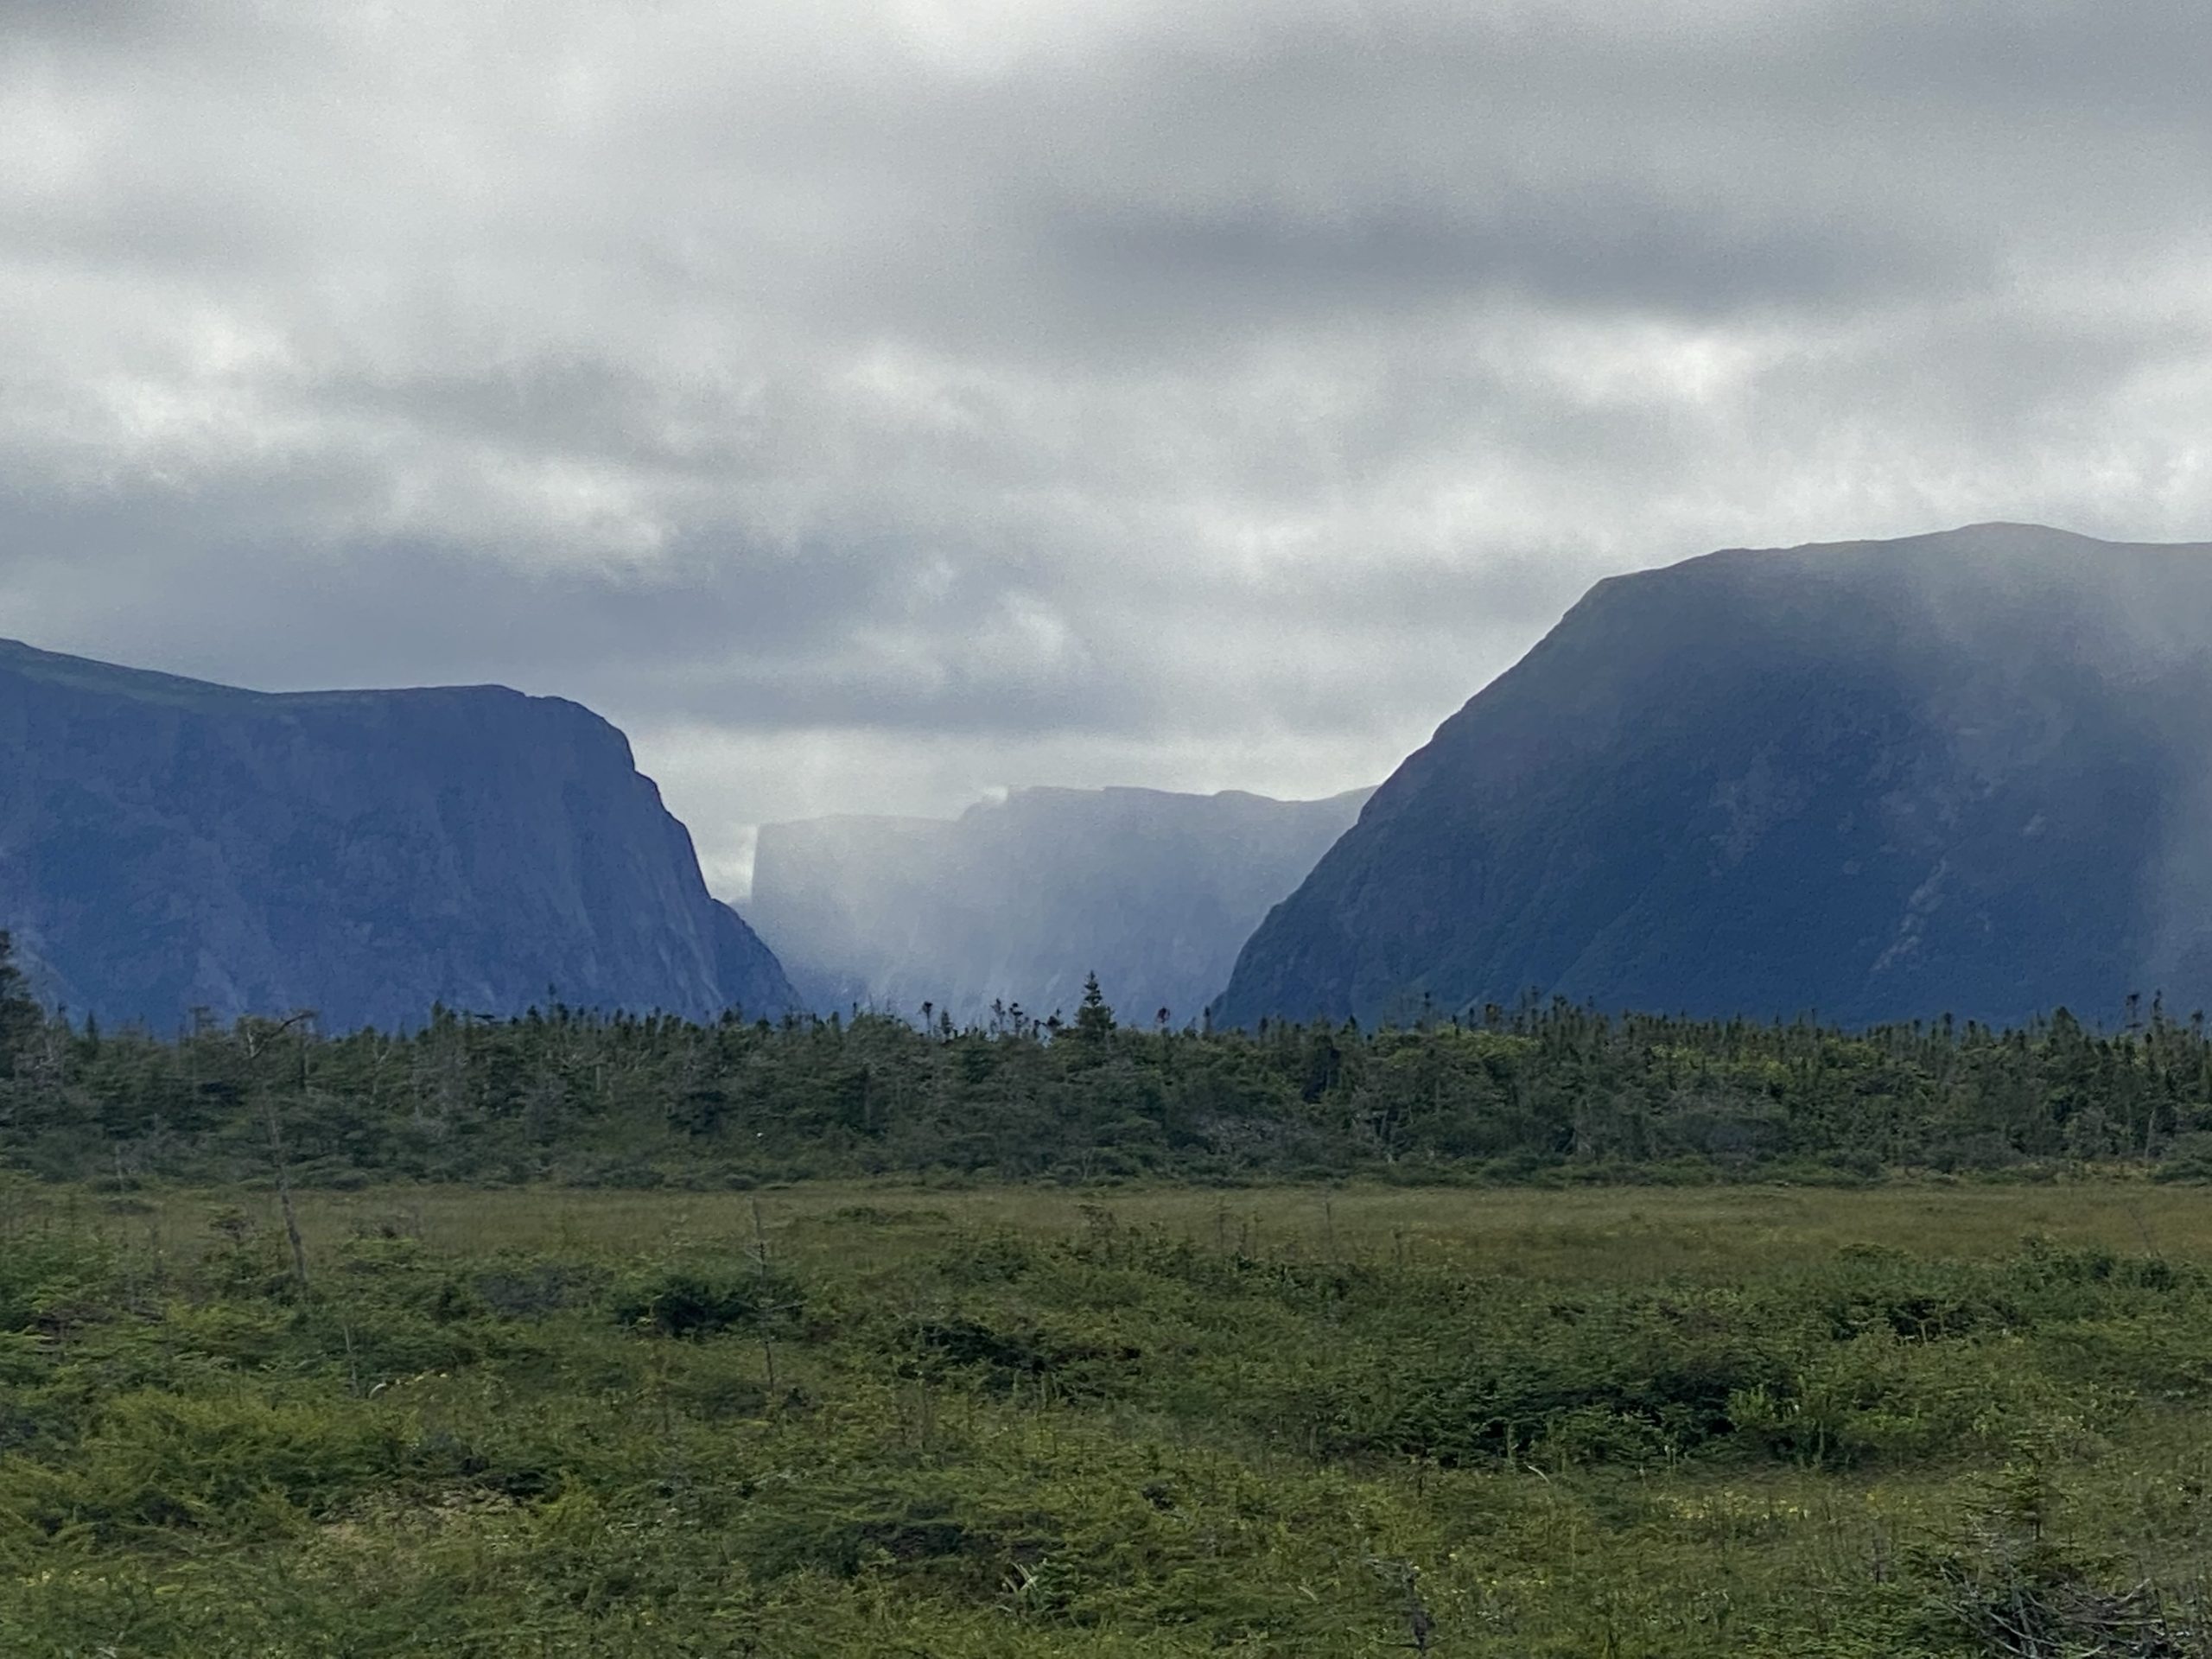 A break in the Long Range mountains in Gros Morne National Park in Newfoundland.